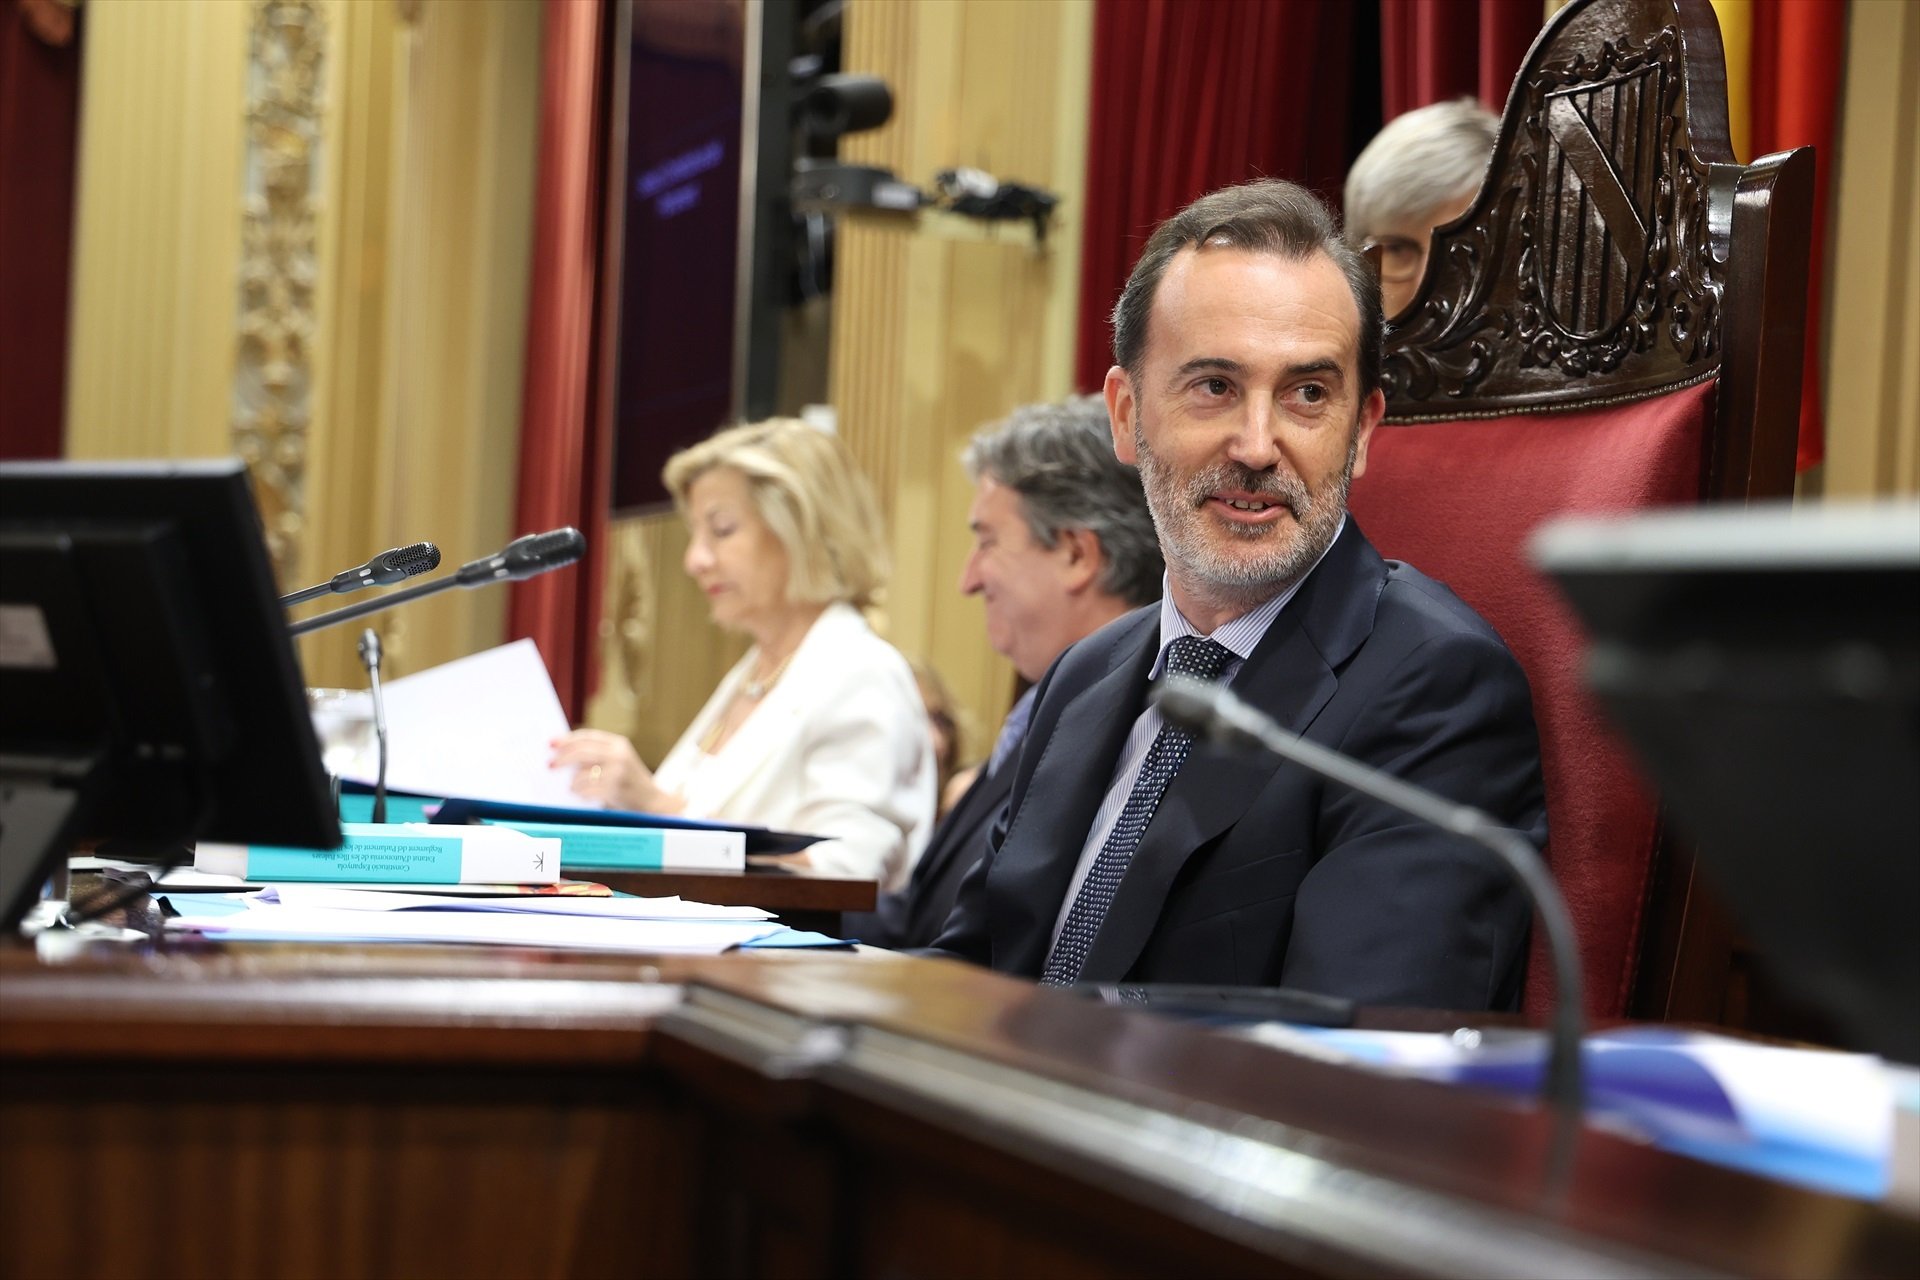 Sexist, homophobic, and denialist: the new speaker of the Balearic Islands parliament